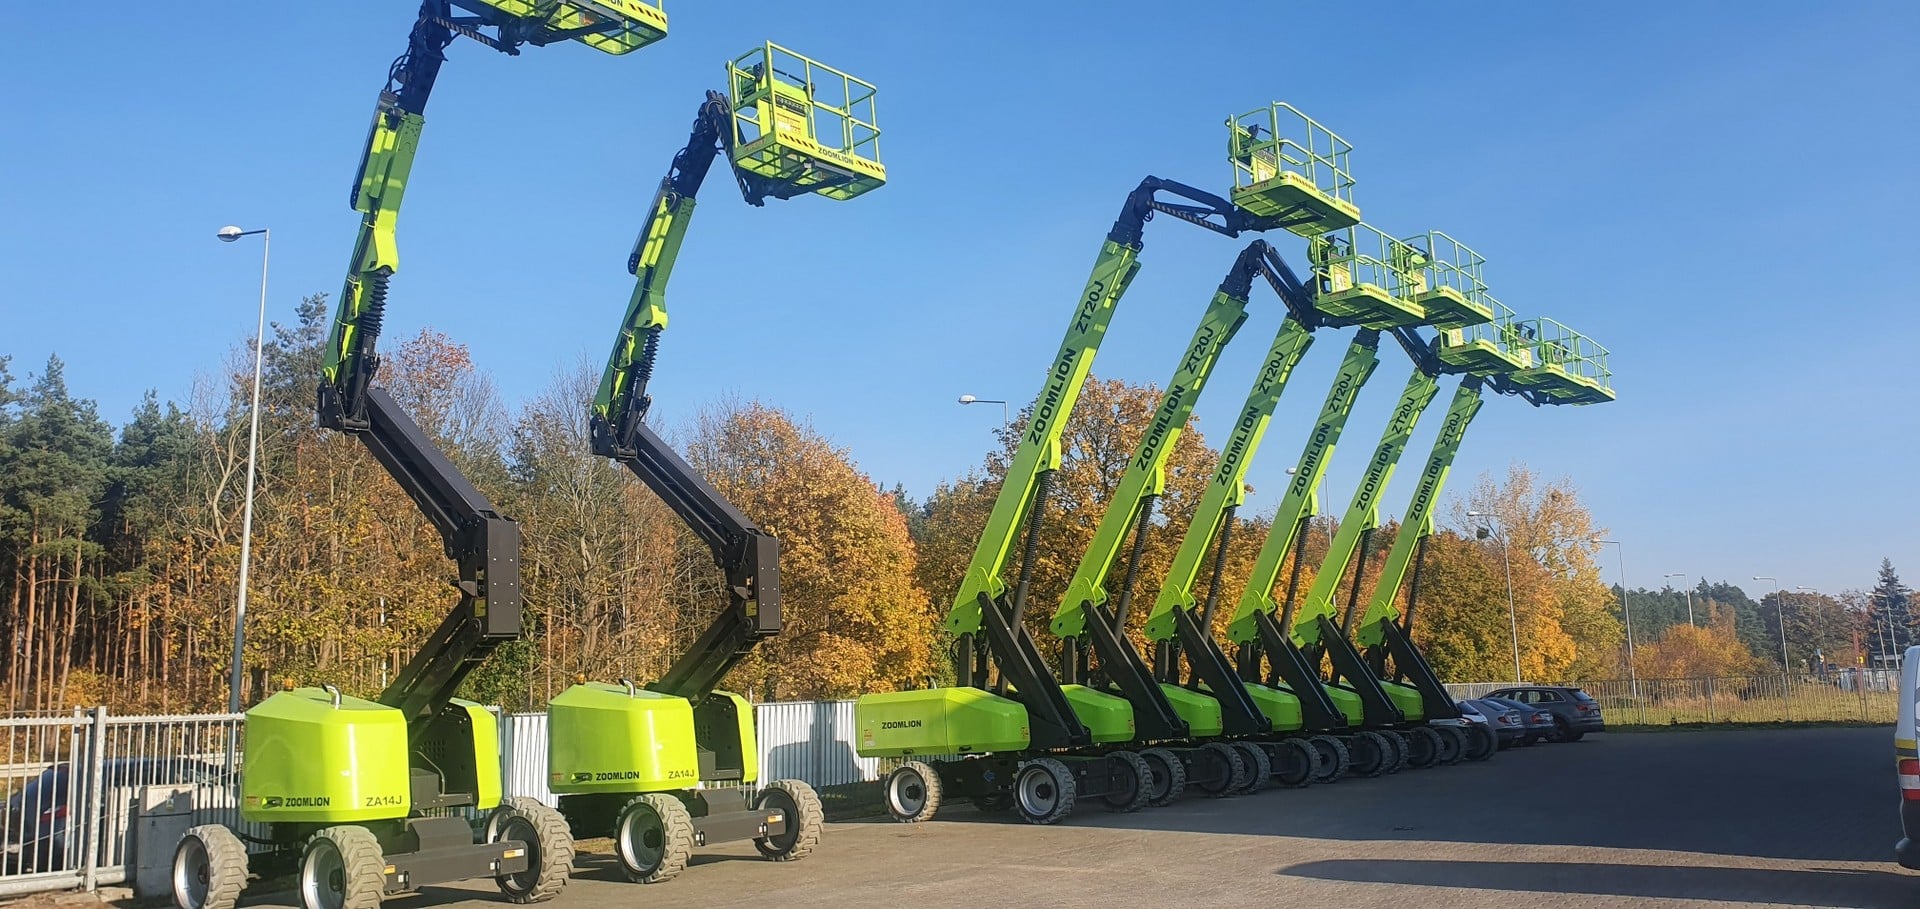 A row of Zoomlion aerial work platforms in the parking lot.